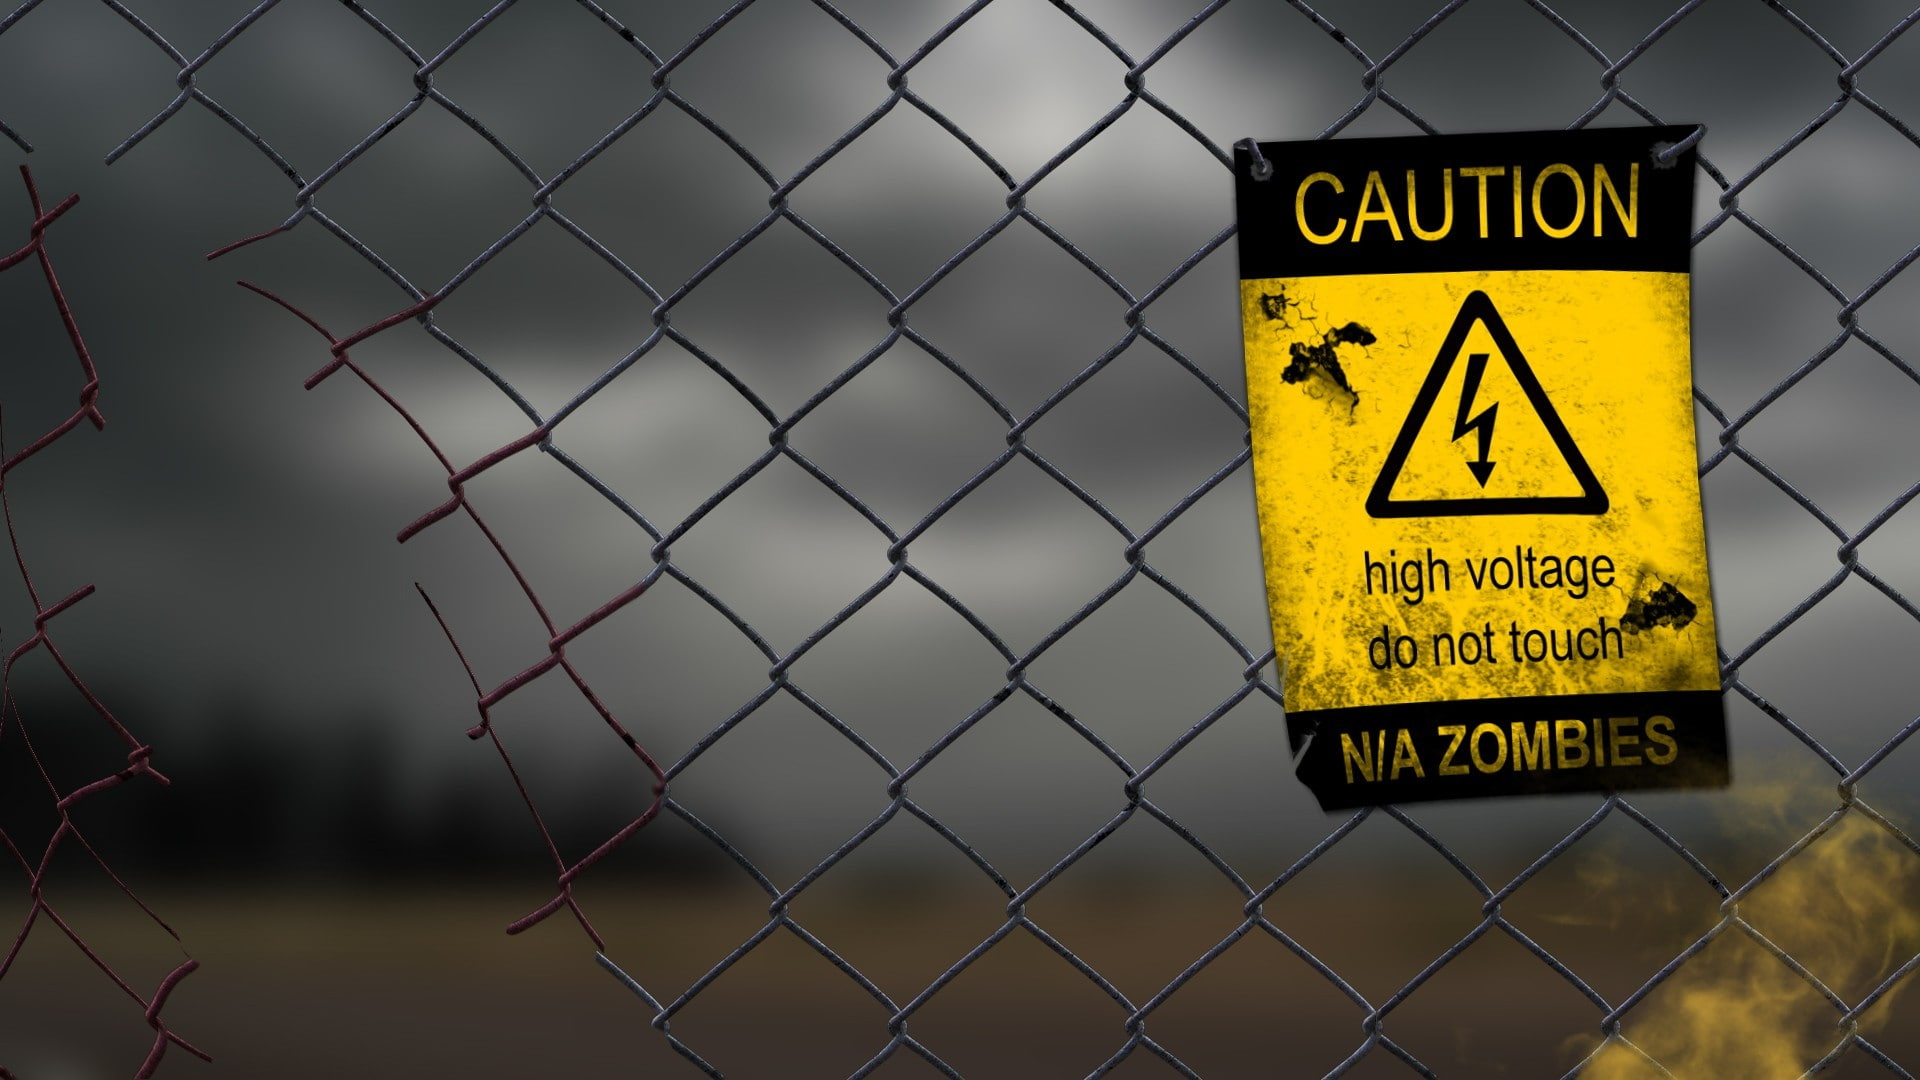 warning signs, zombies, high voltage, digital art, humor, fence